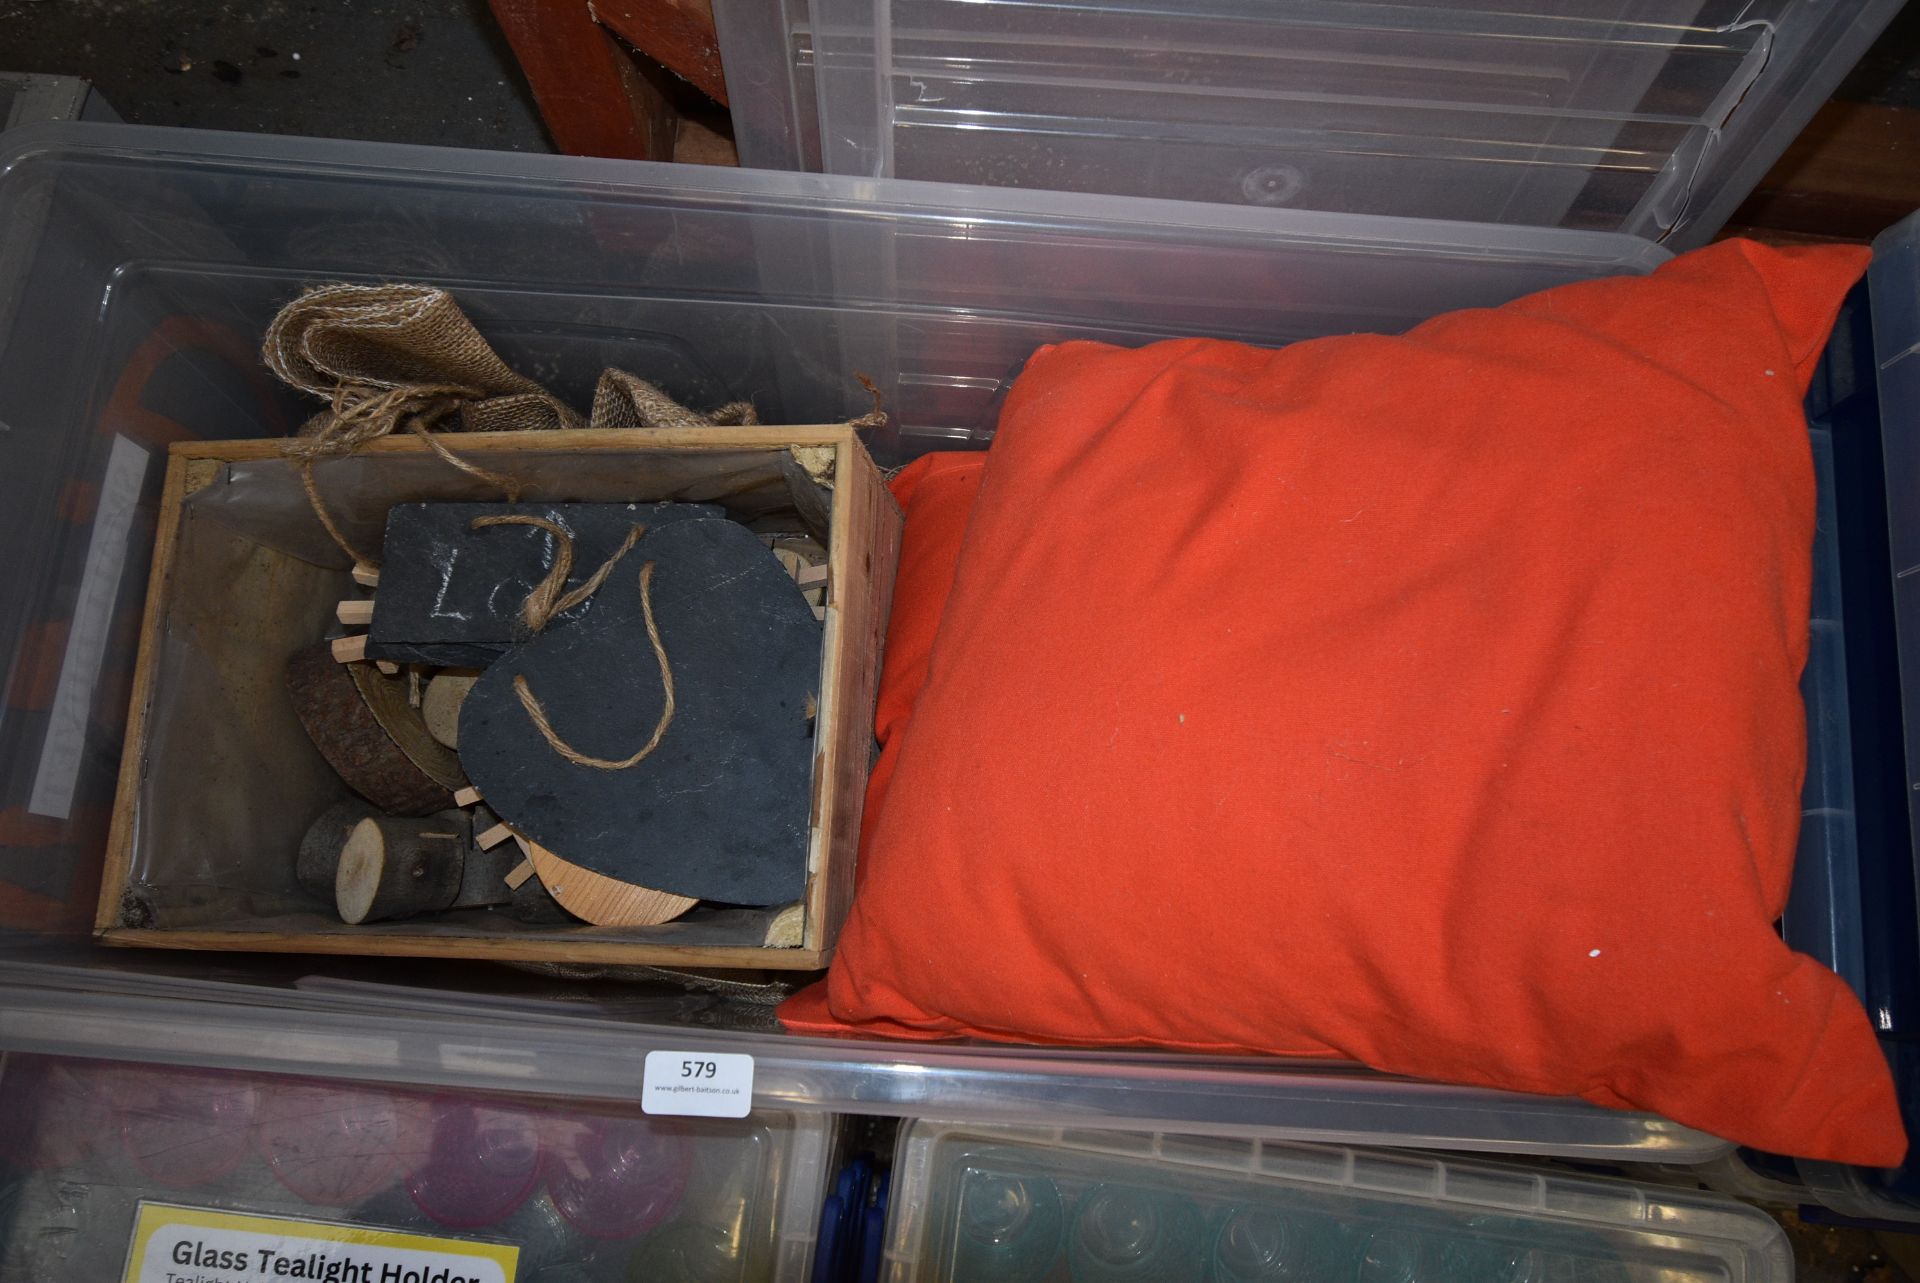 *Plastic Crate Containing Slate Signs, Scatter Cushions, etc.